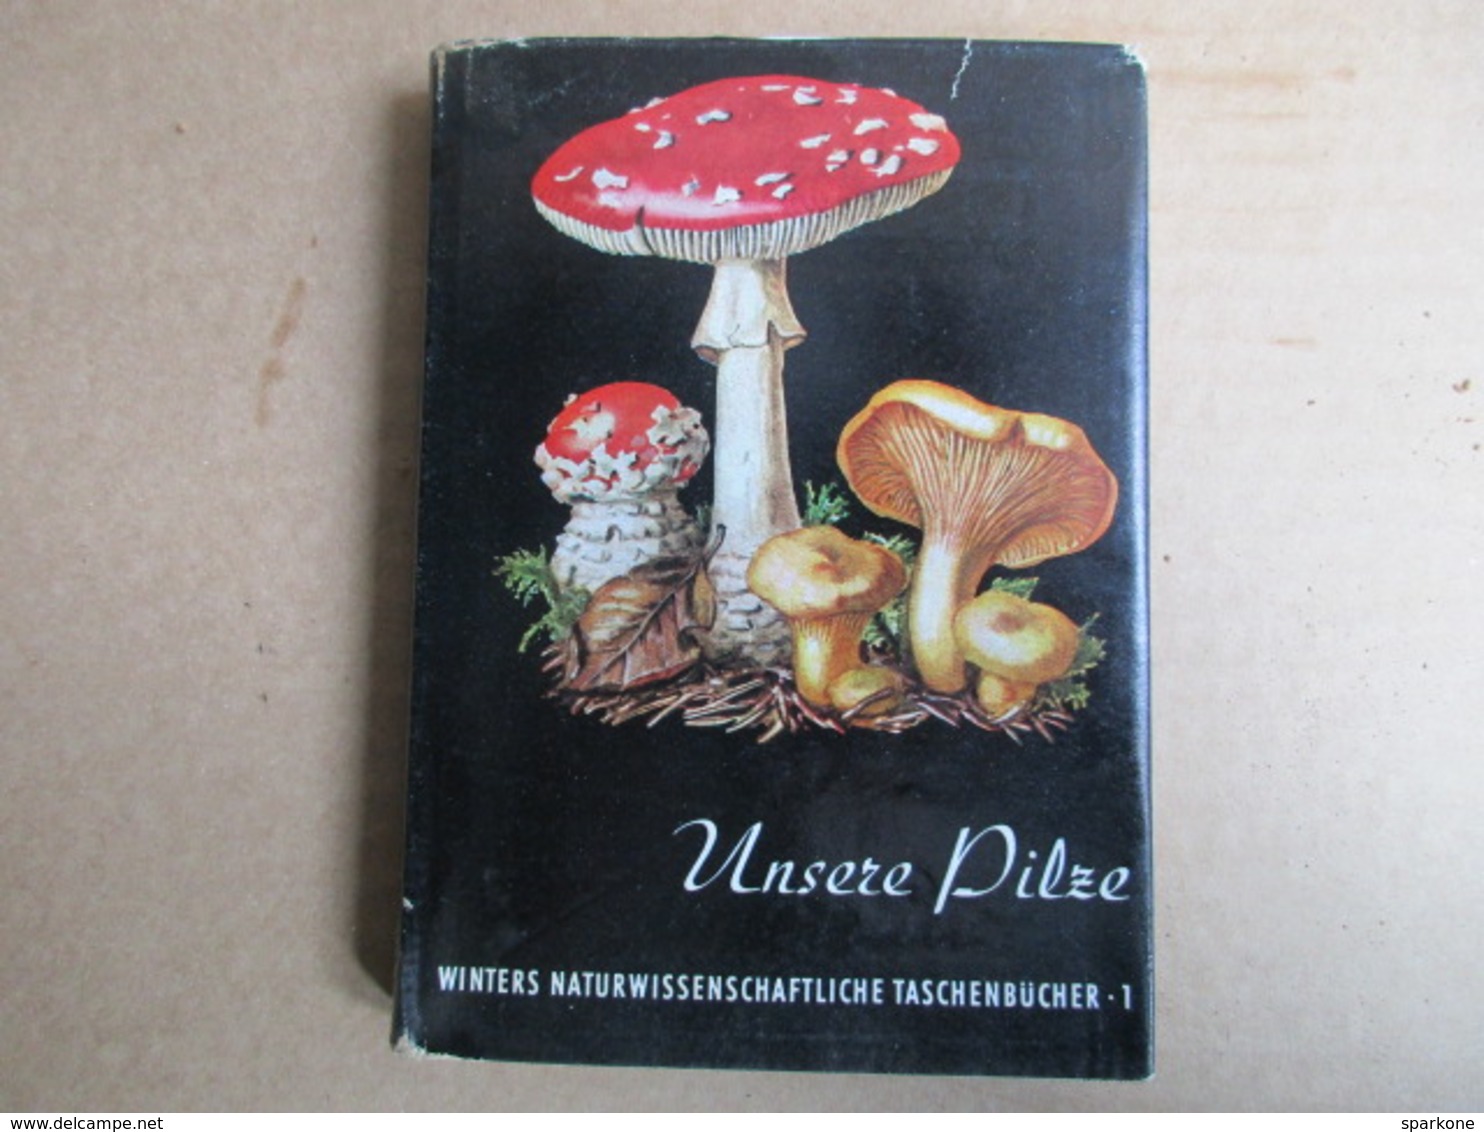 Unsere Pilze (Dr Werner Rauh) - Nature